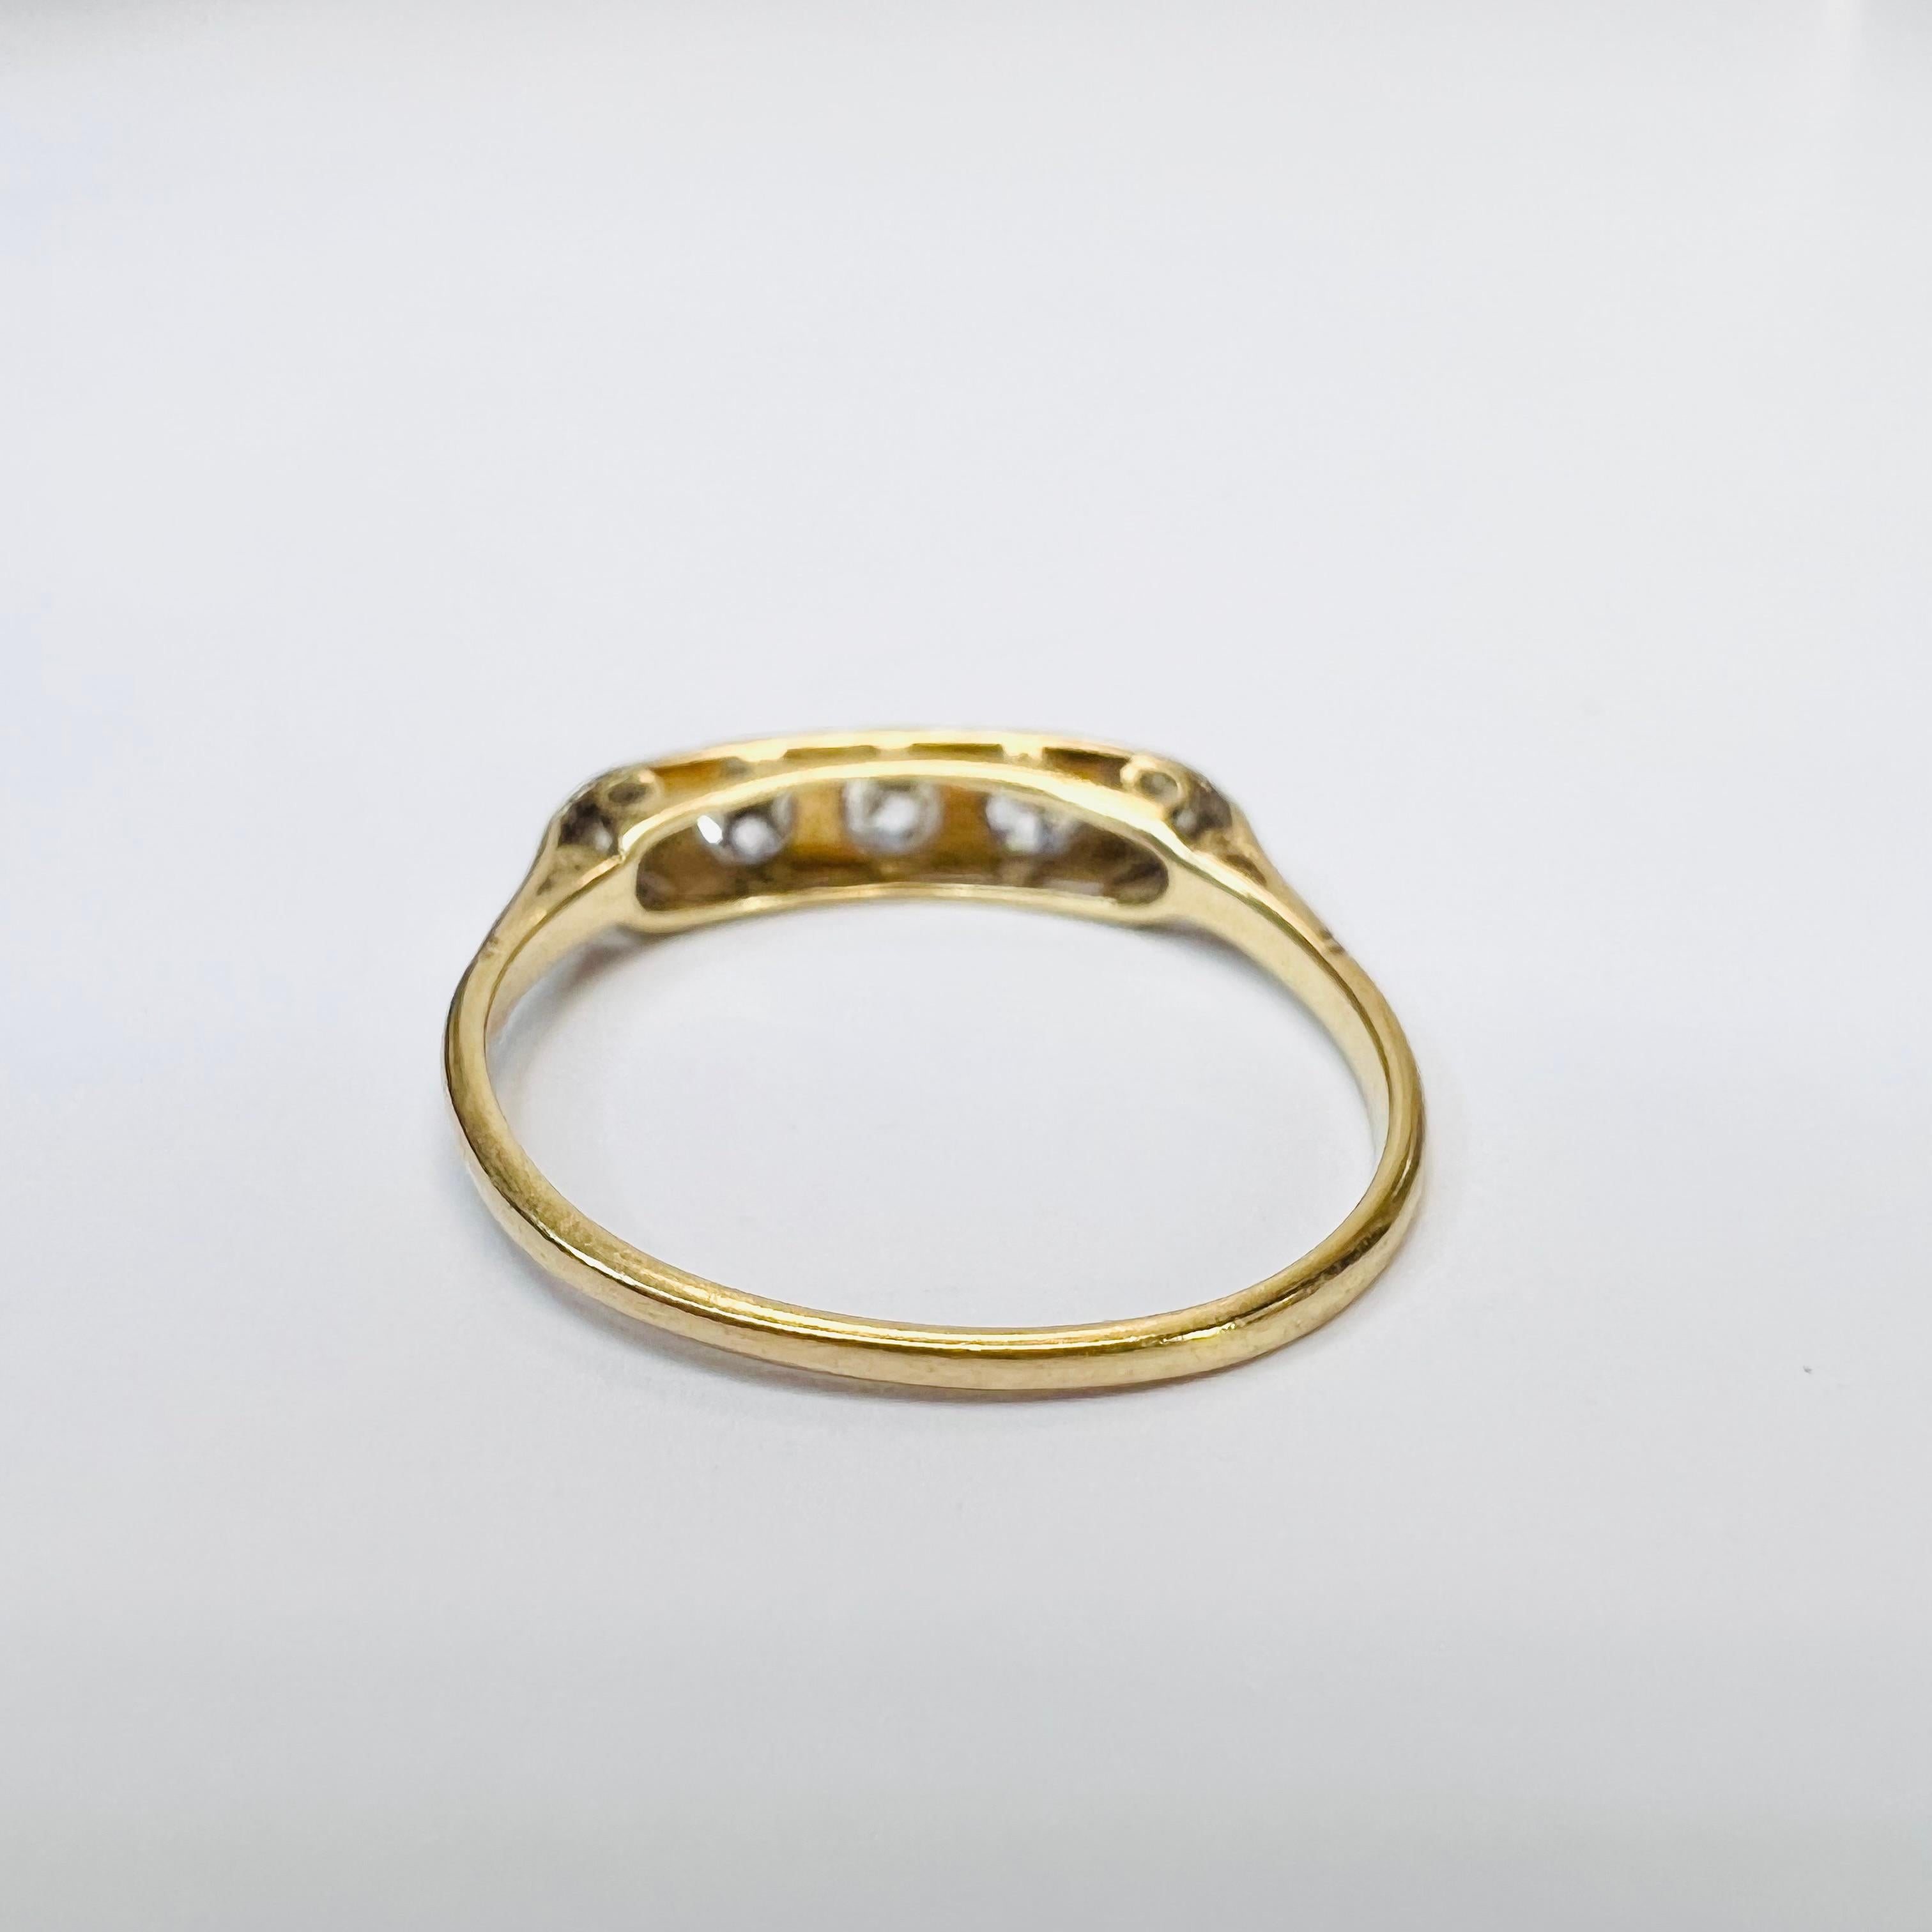 Antique 18K Yellow Gold and Platinum 0.45CTW Diamond Ring Band In Excellent Condition For Sale In Addison, TX